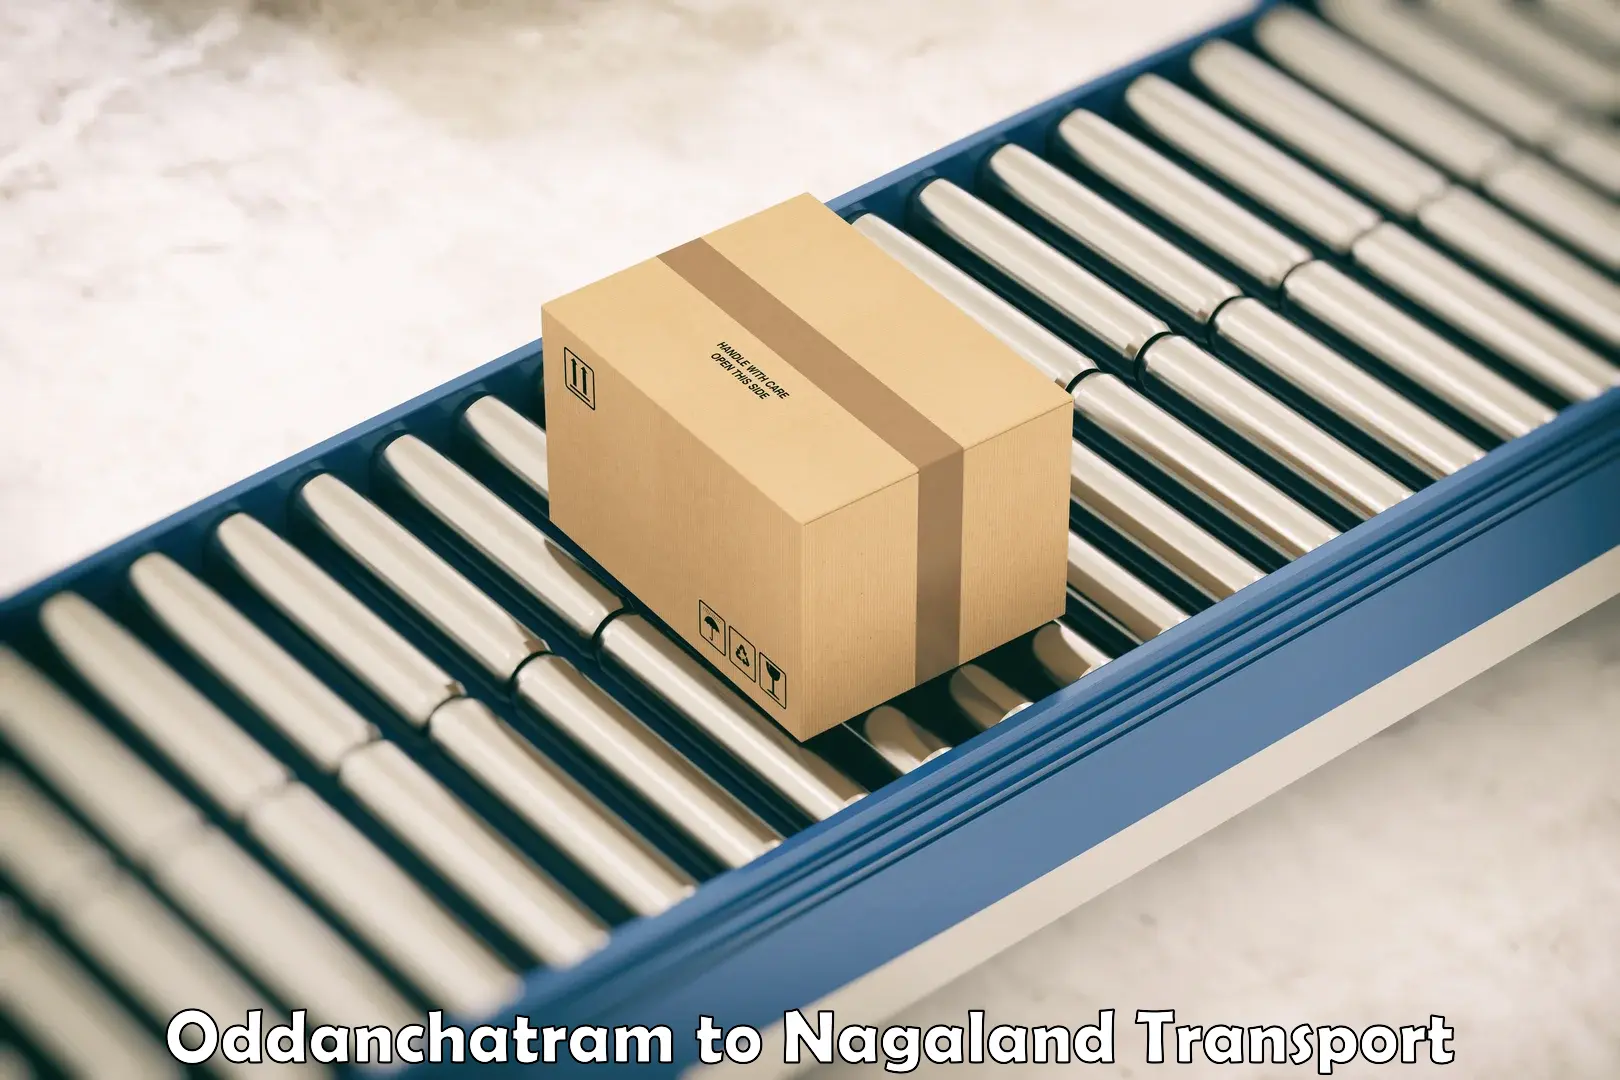 Air freight transport services Oddanchatram to Dimapur